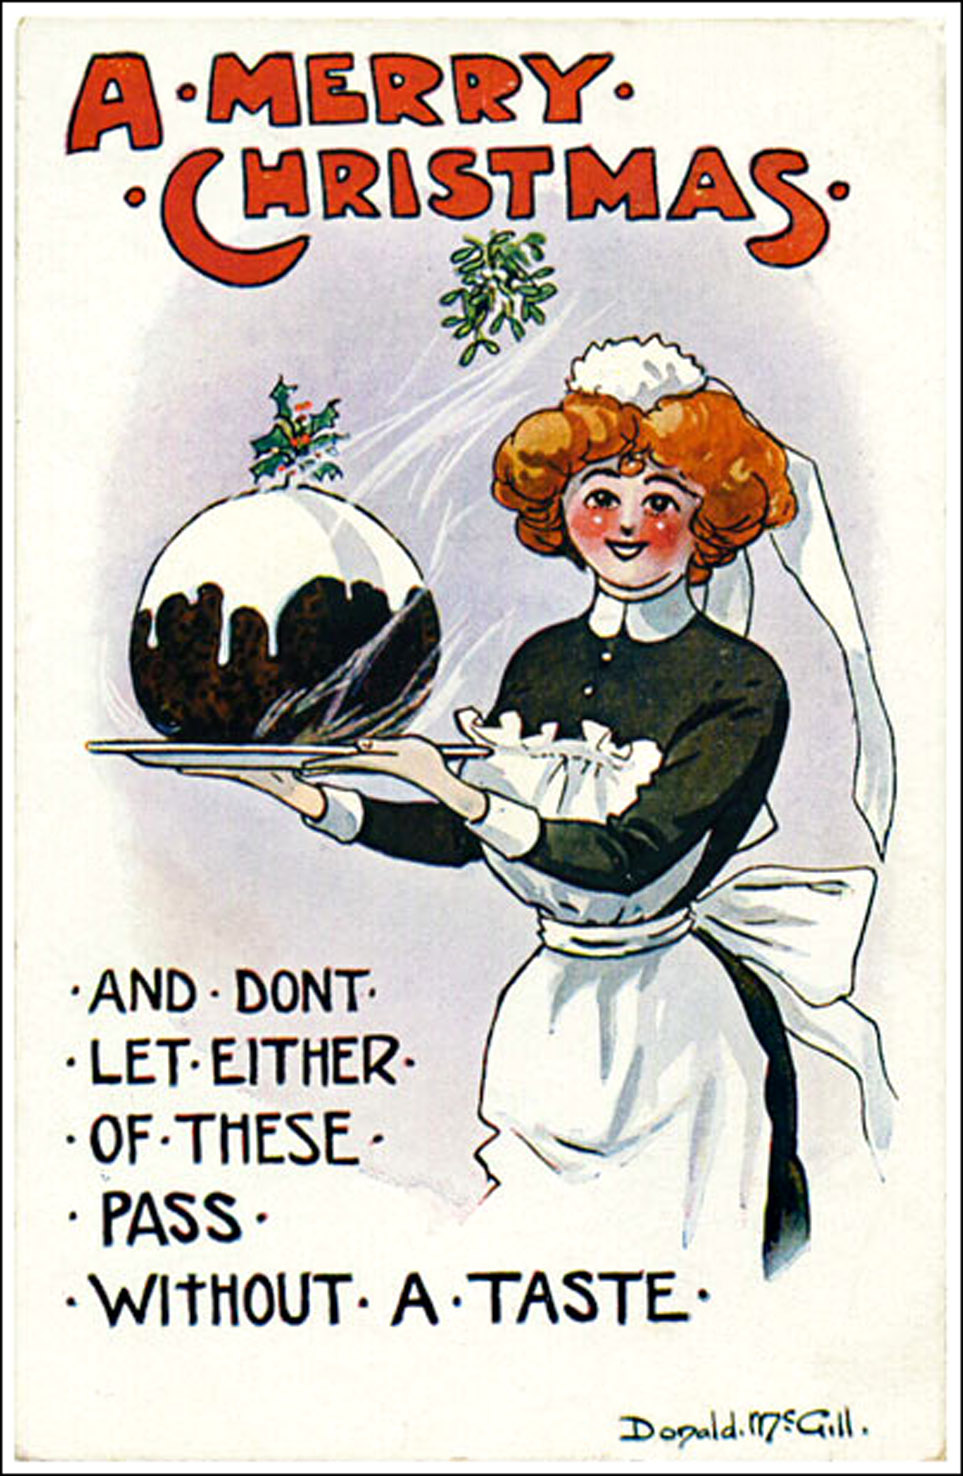 Don't let these pass without a taste - saucy Christmas card by Donald mcGill